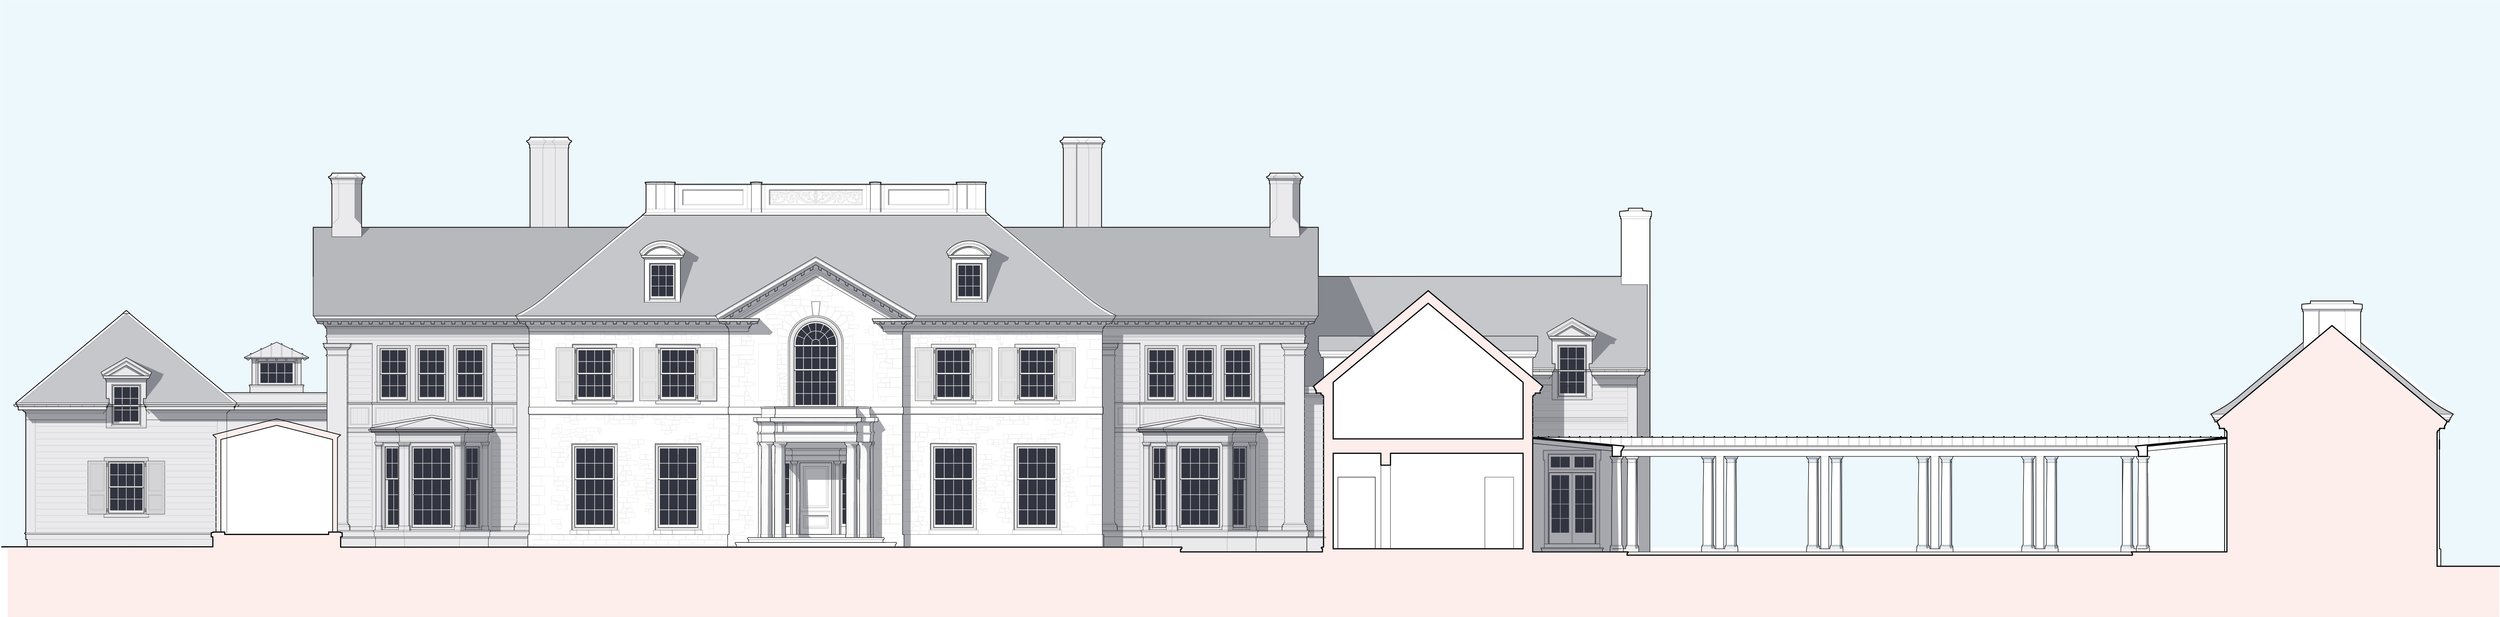 main house elevation section.jpg